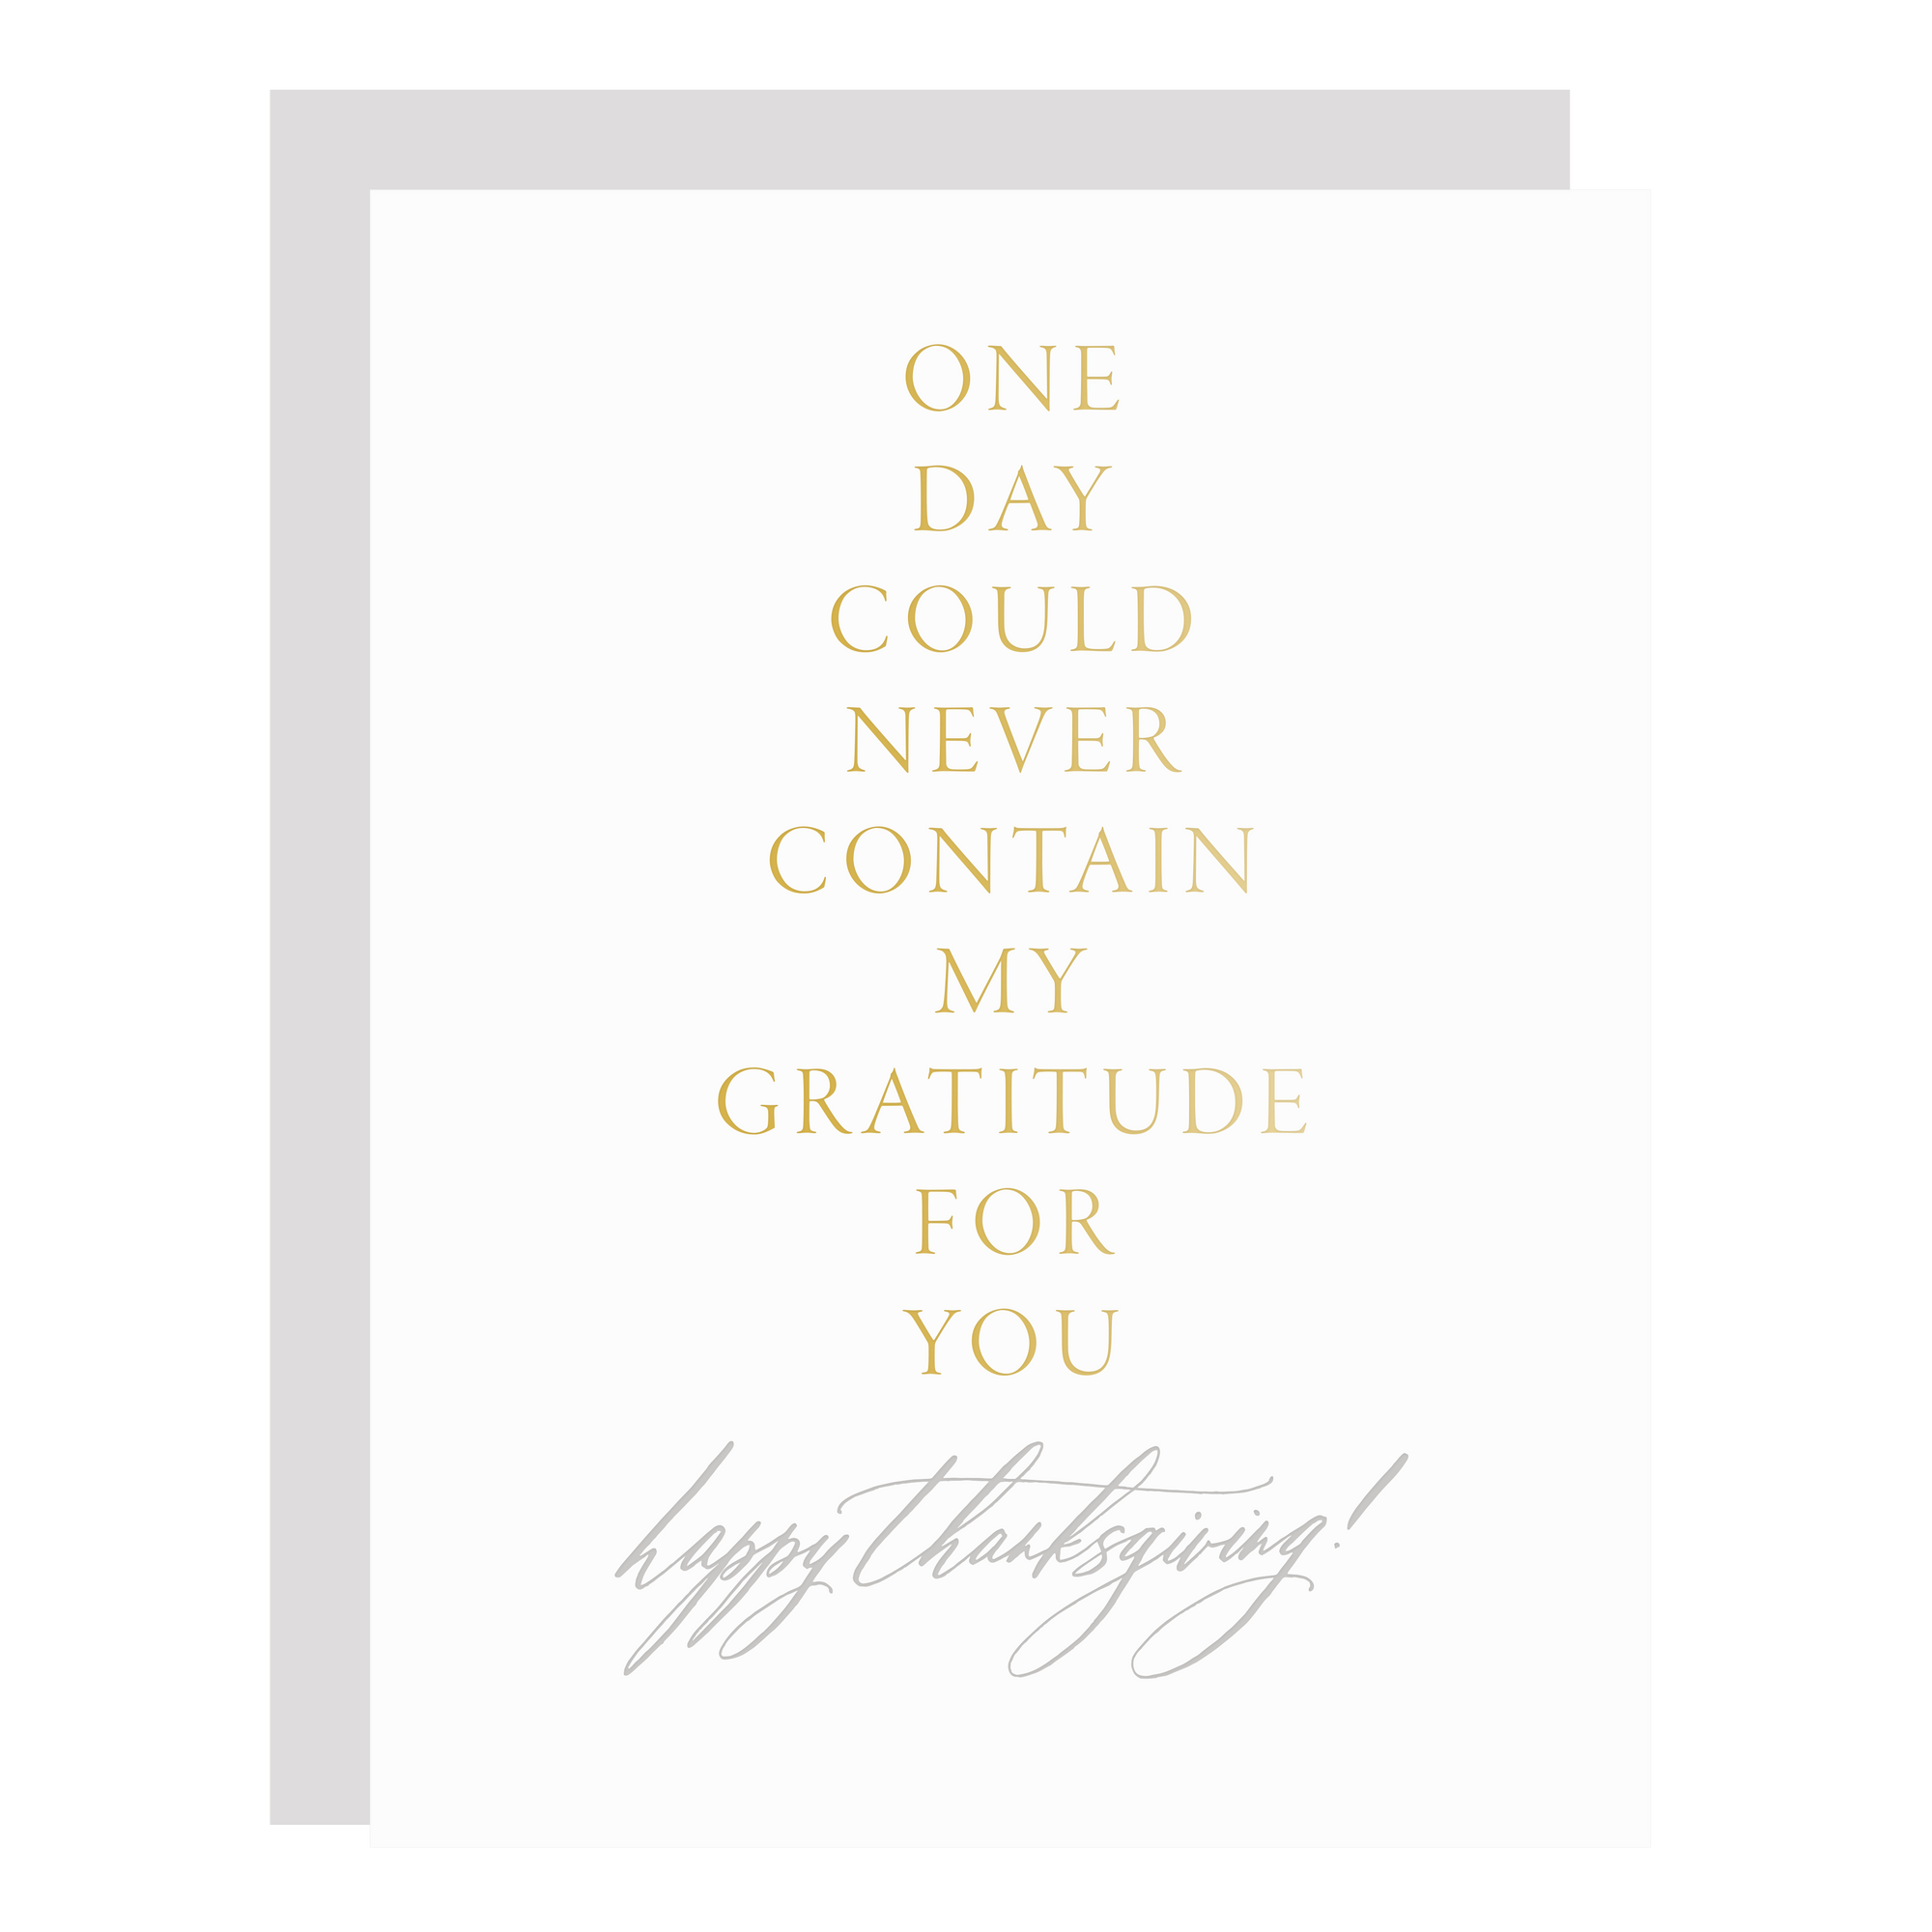 "Thanksgiving Gratitude" card, letterpress printed by hand in pale grey ink and gold foil